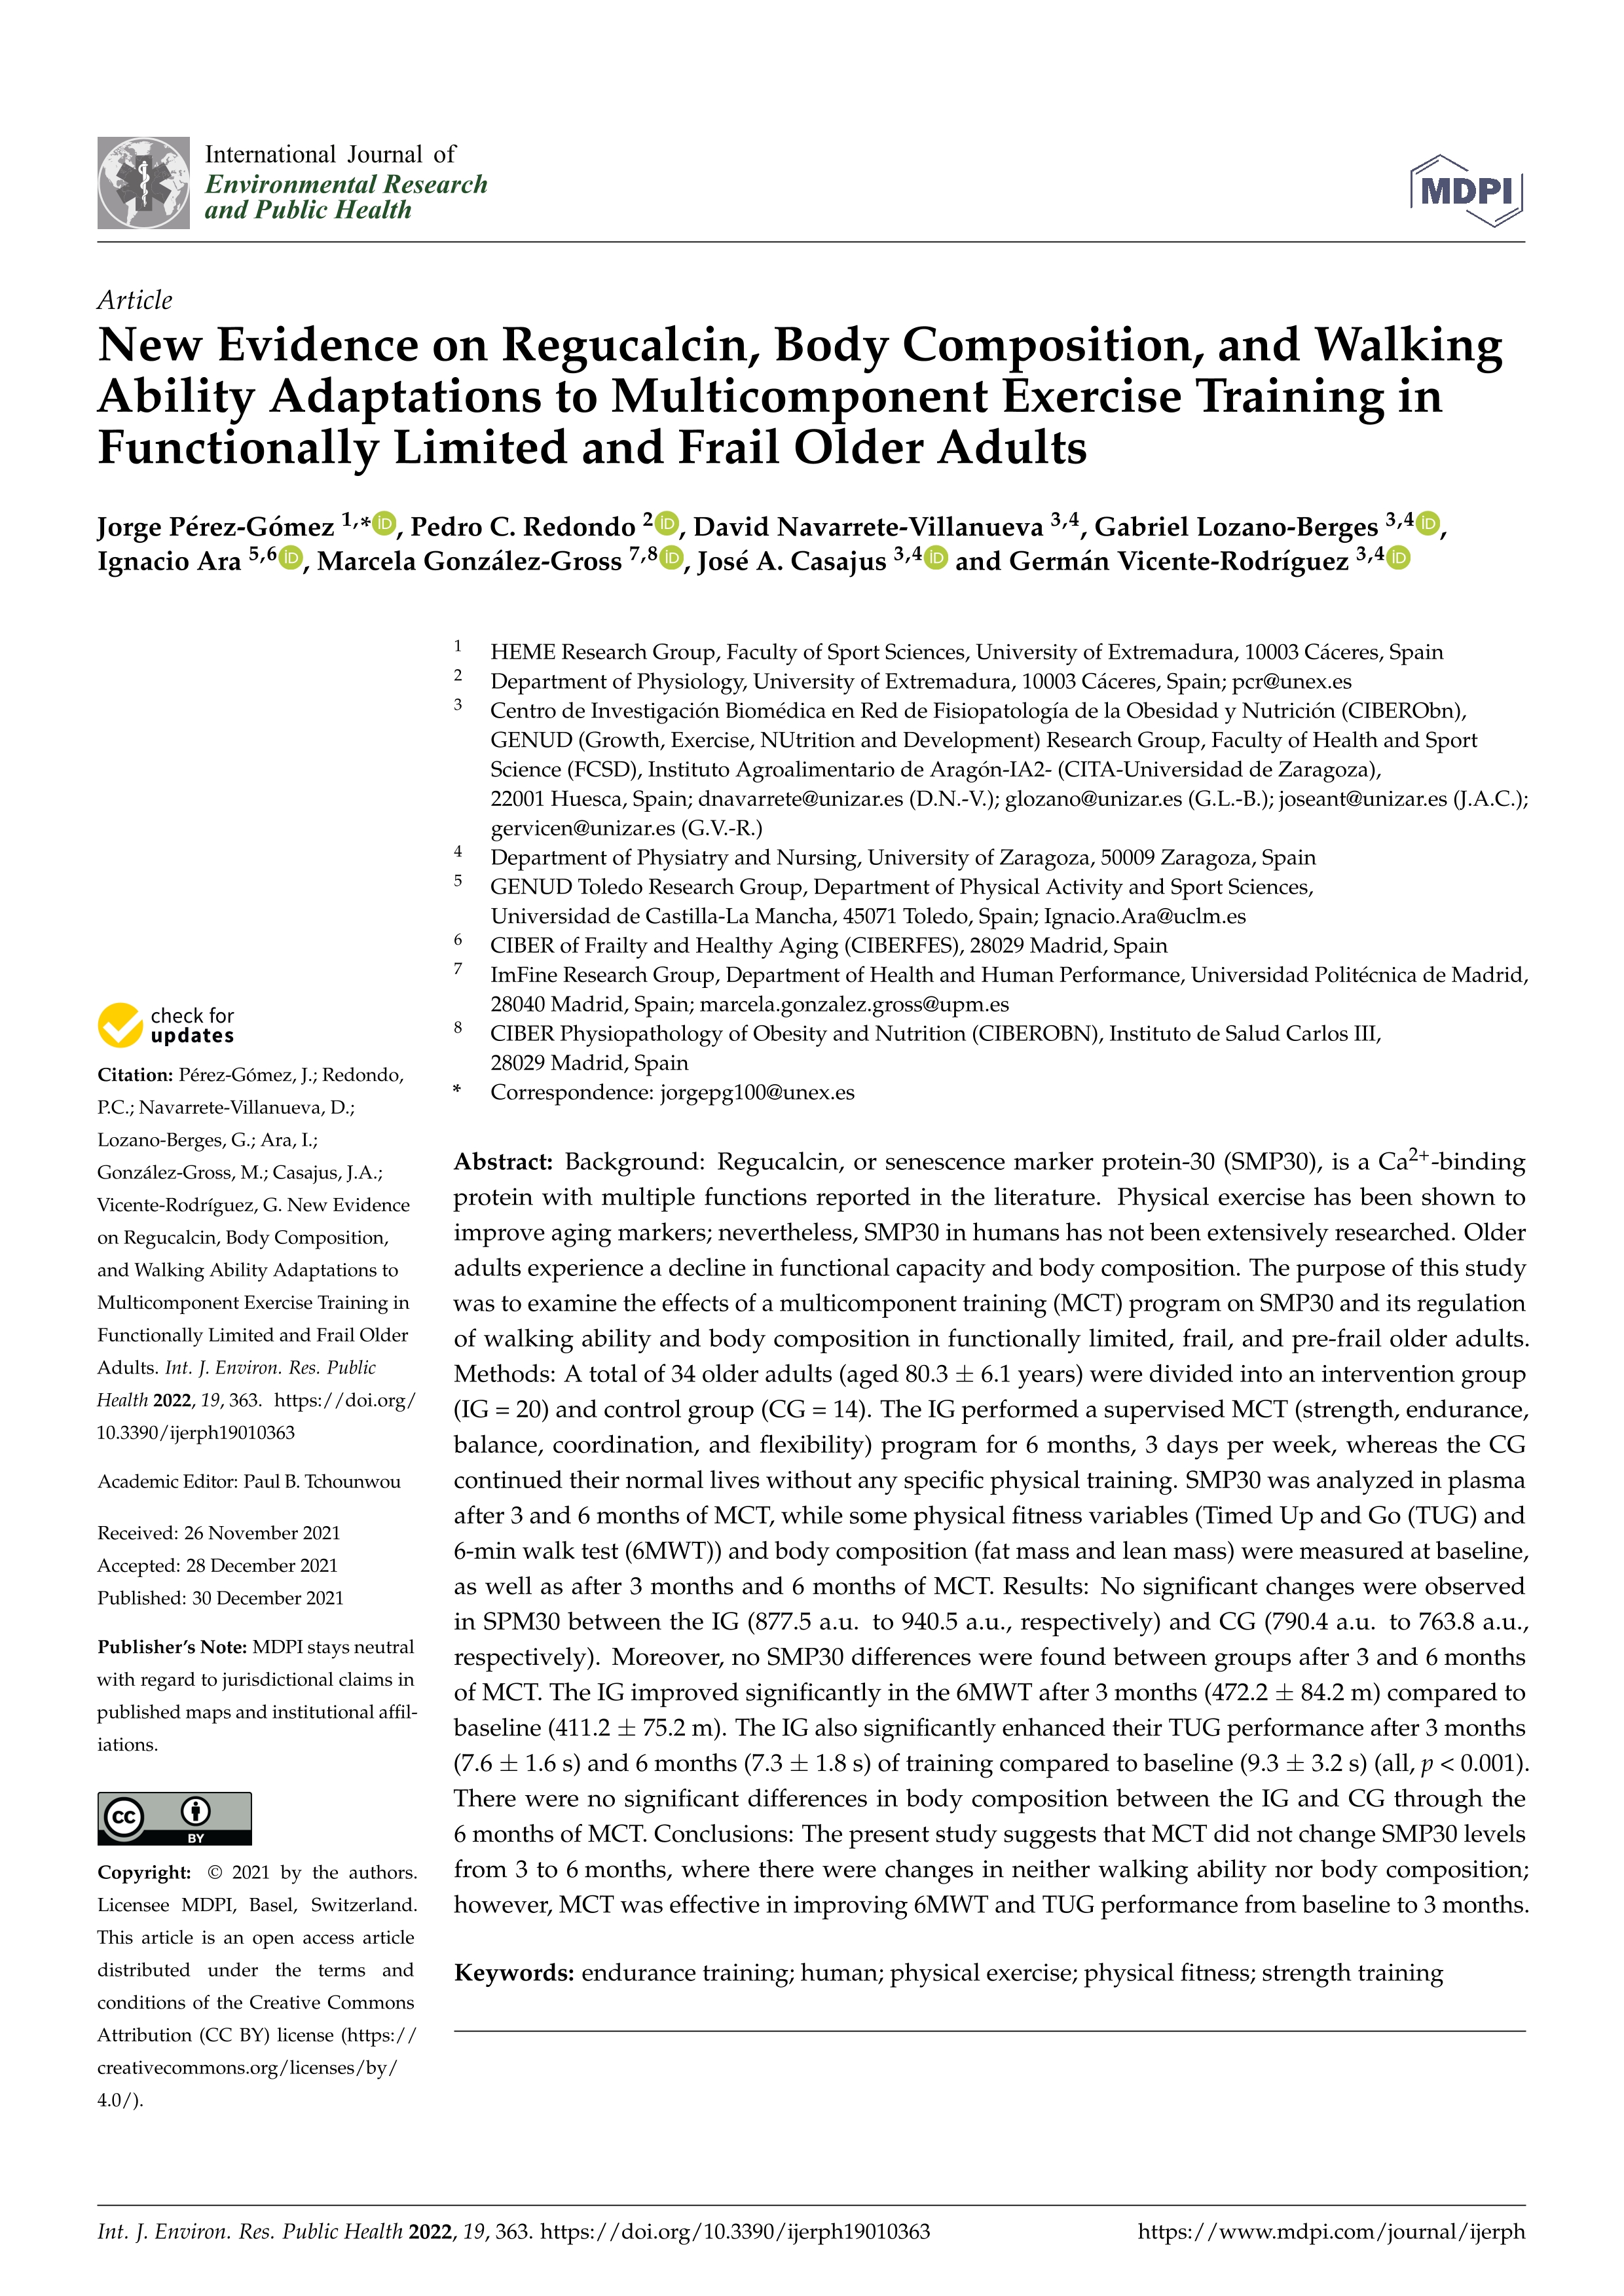 New Evidence on Regucalcin, Body Composition, and Walking Ability Adaptations to Multicomponent Exercise Training in Functionally Limited and Frail Older Adults